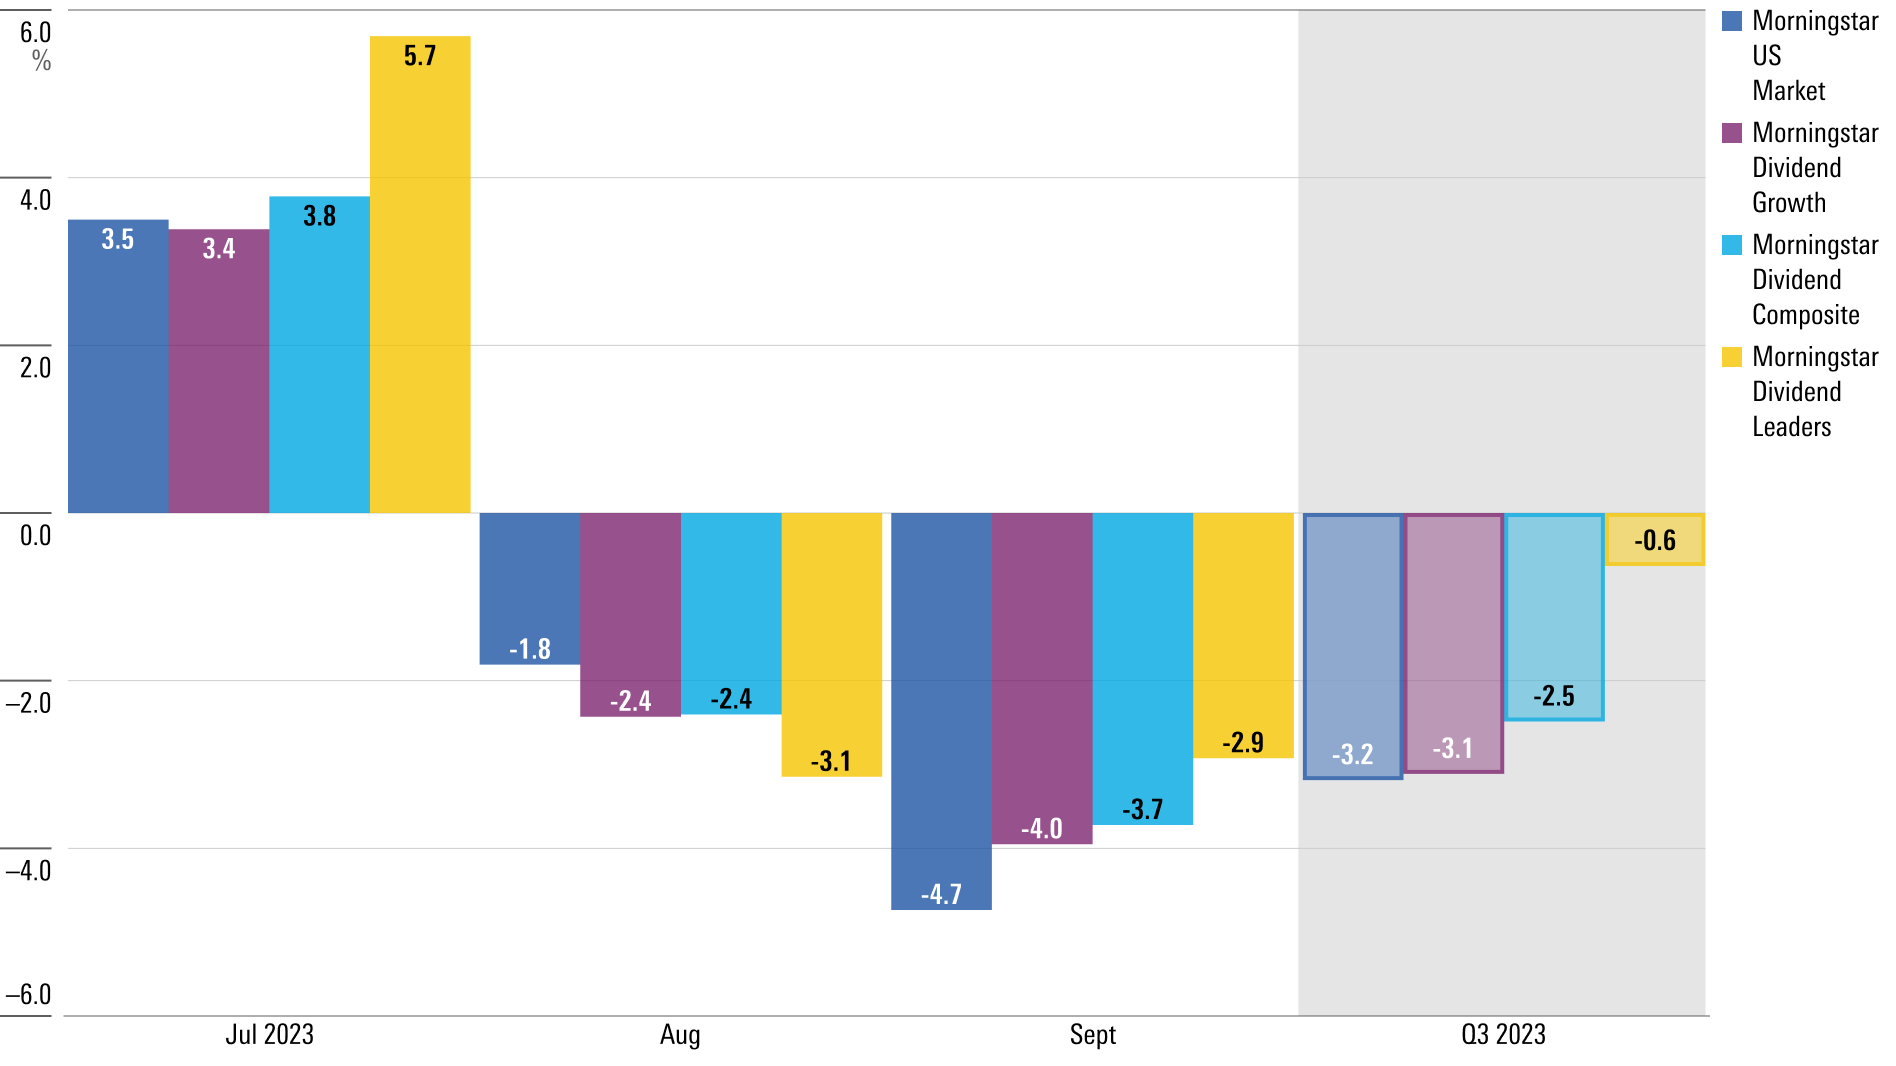 Bar chart showing the performance of Morningstar dividend indexes in Q3 2023.